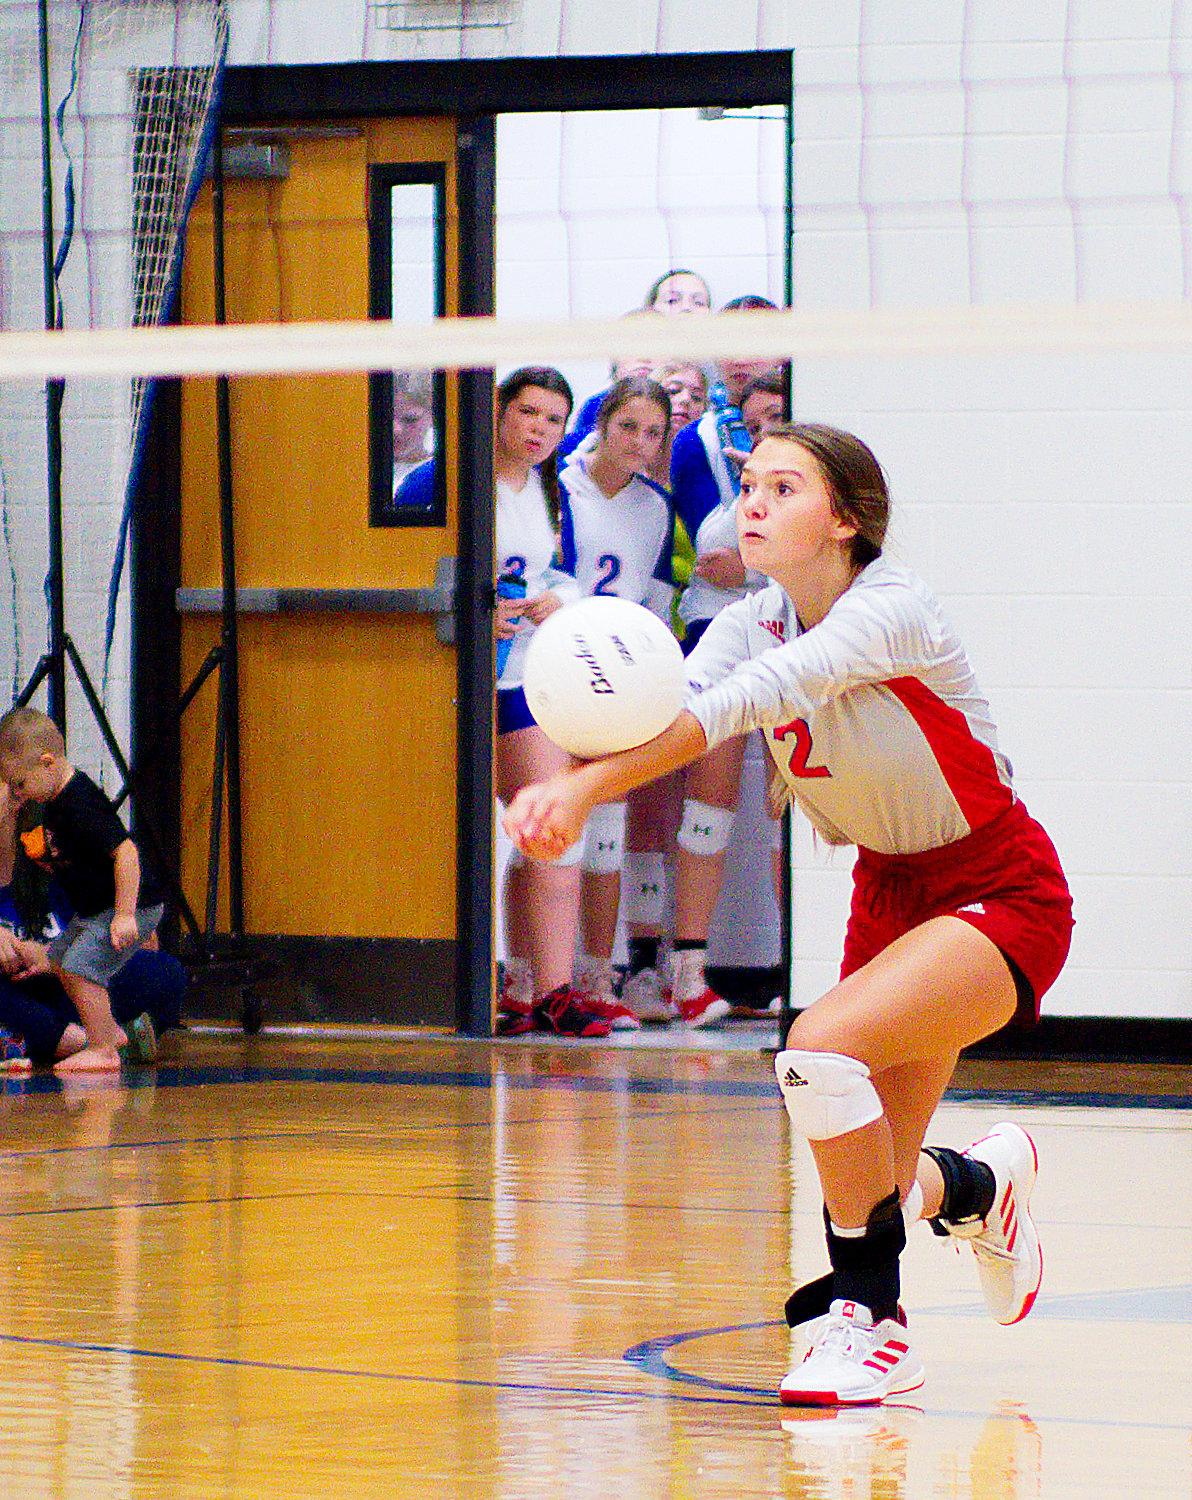 Kalli Trimble bumps the ball in the third set as the JV teams looks on. [see more from the Lady Panther win]